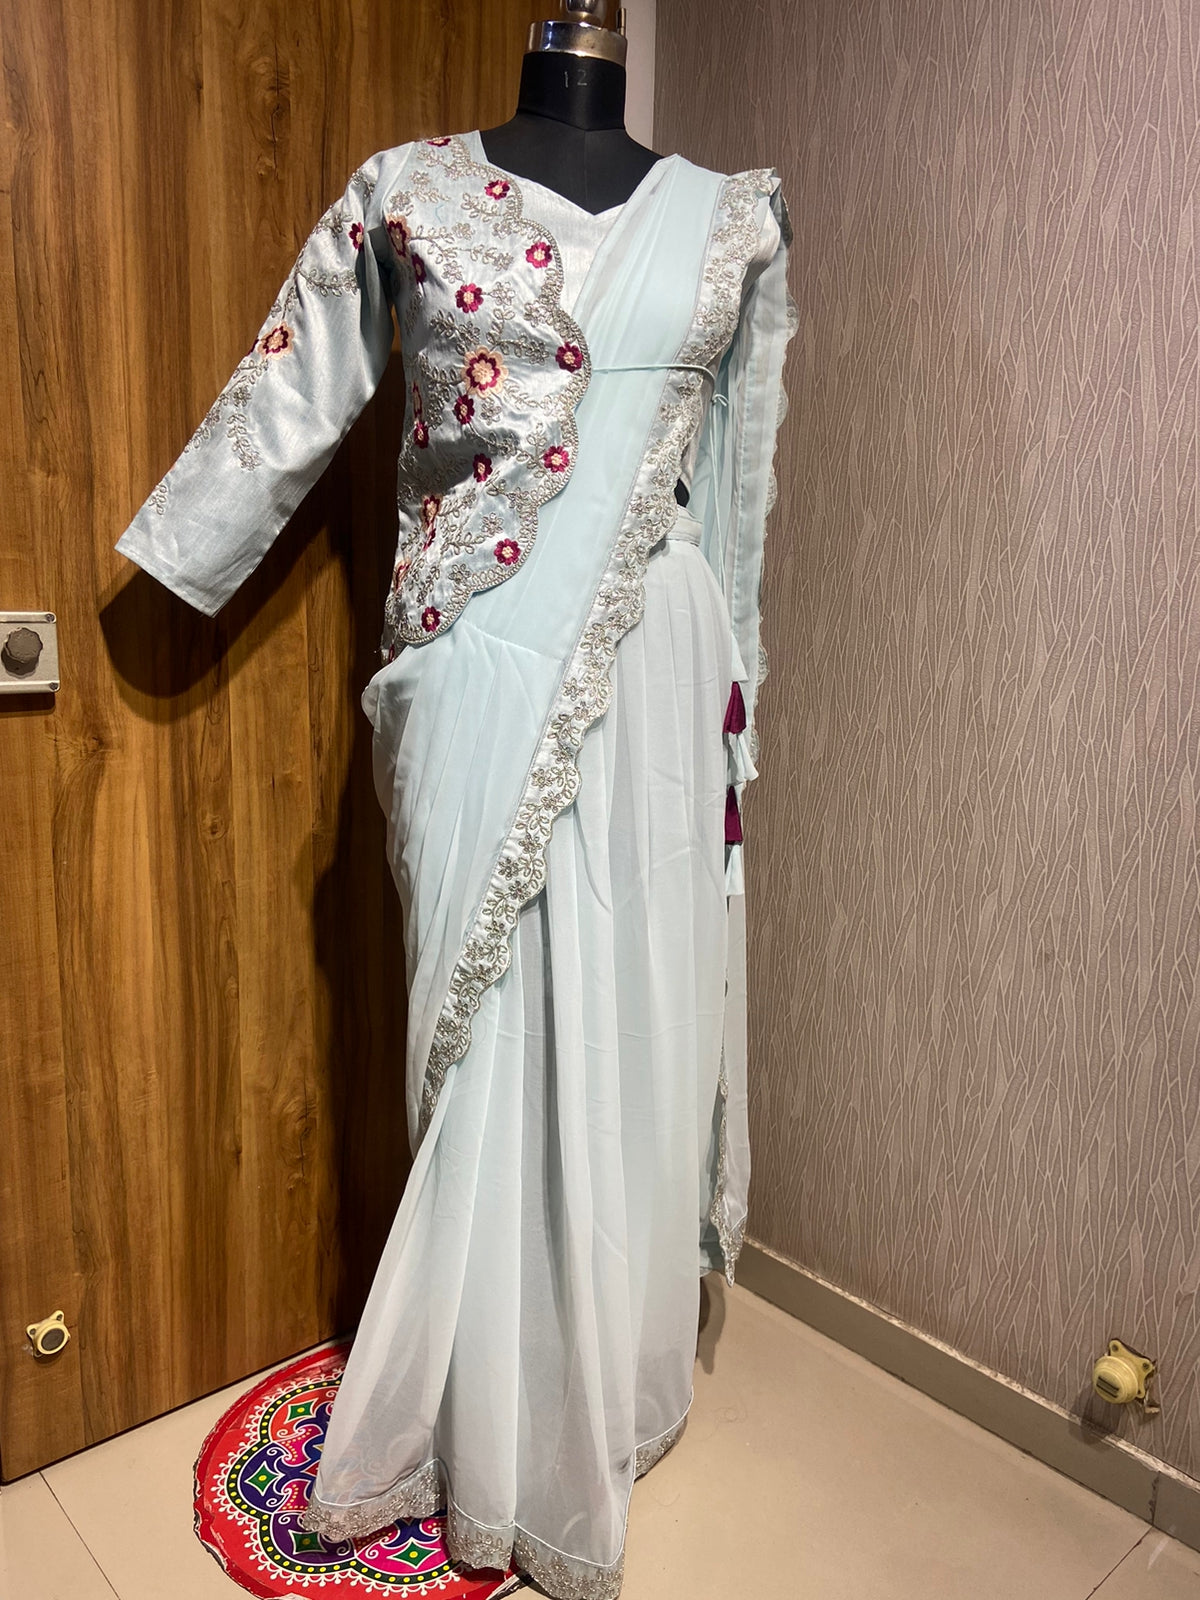 Padded Saree Blouse Jackets - Buy Padded Saree Blouse Jackets online in  India